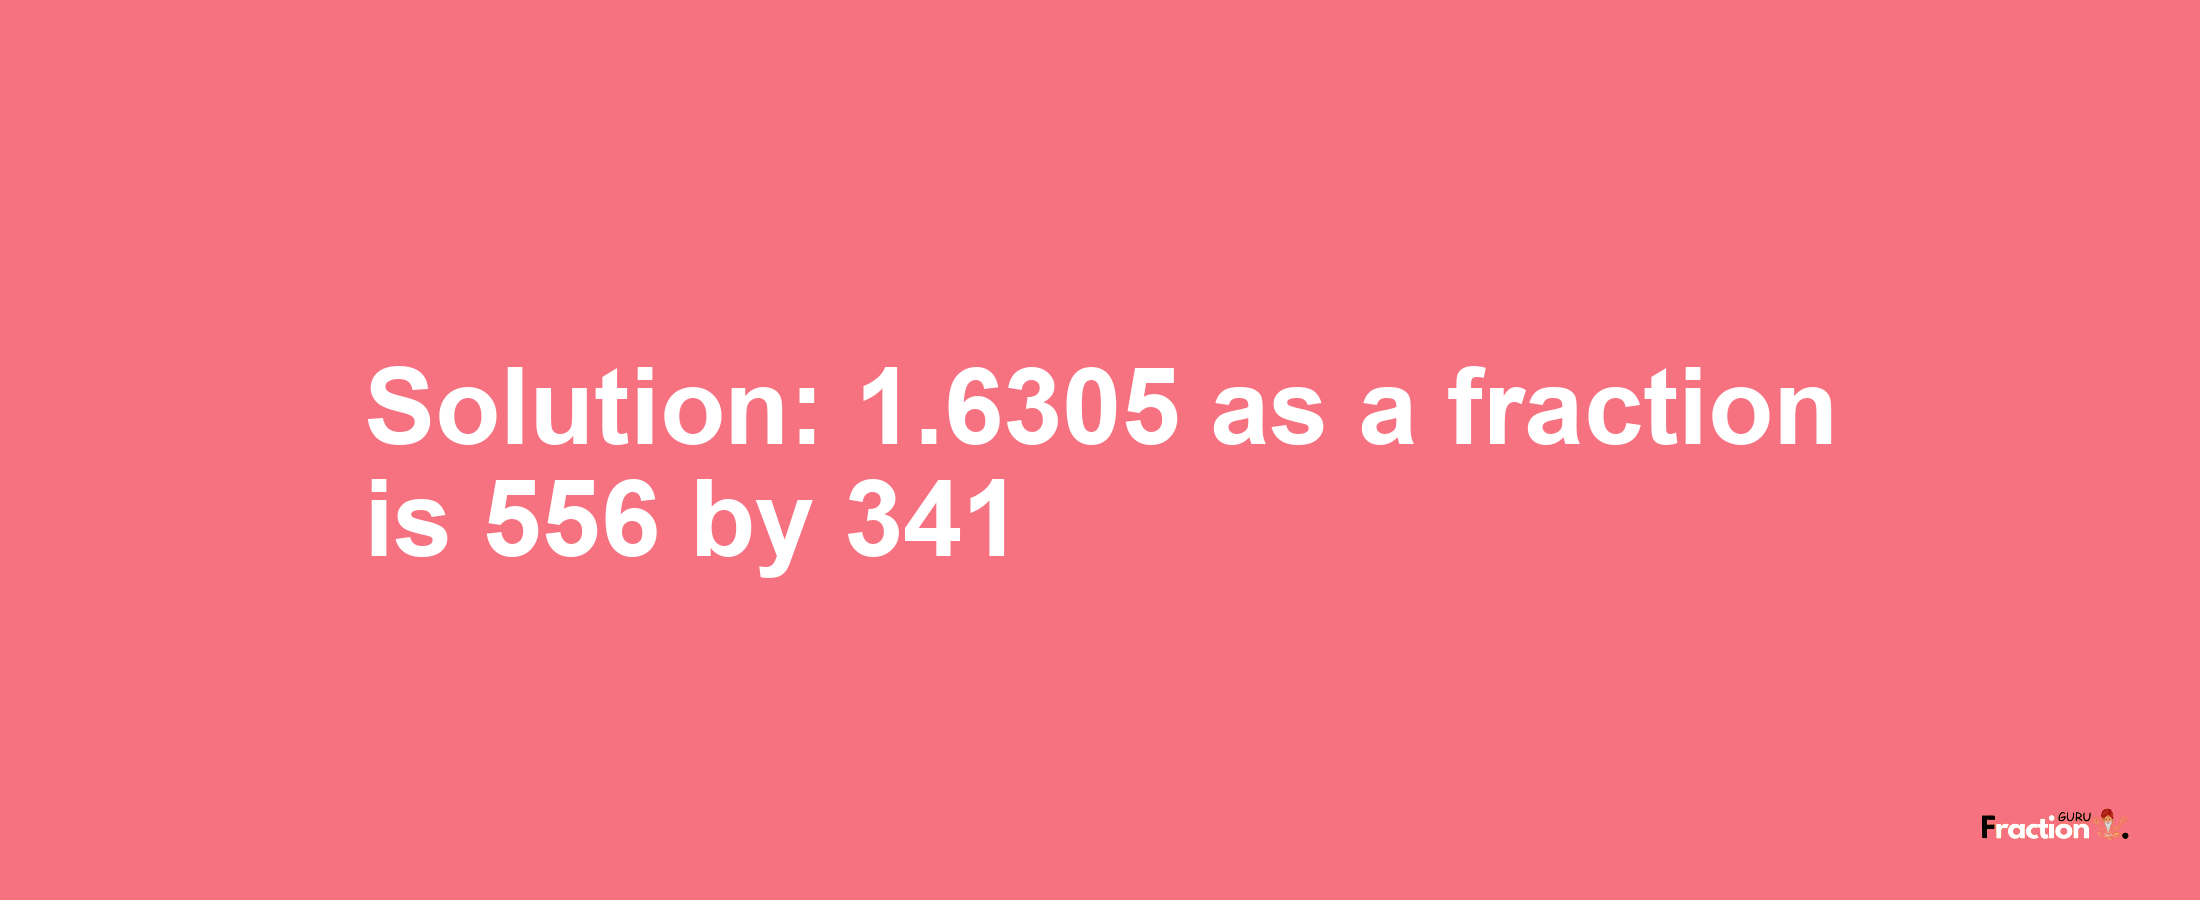 Solution:1.6305 as a fraction is 556/341